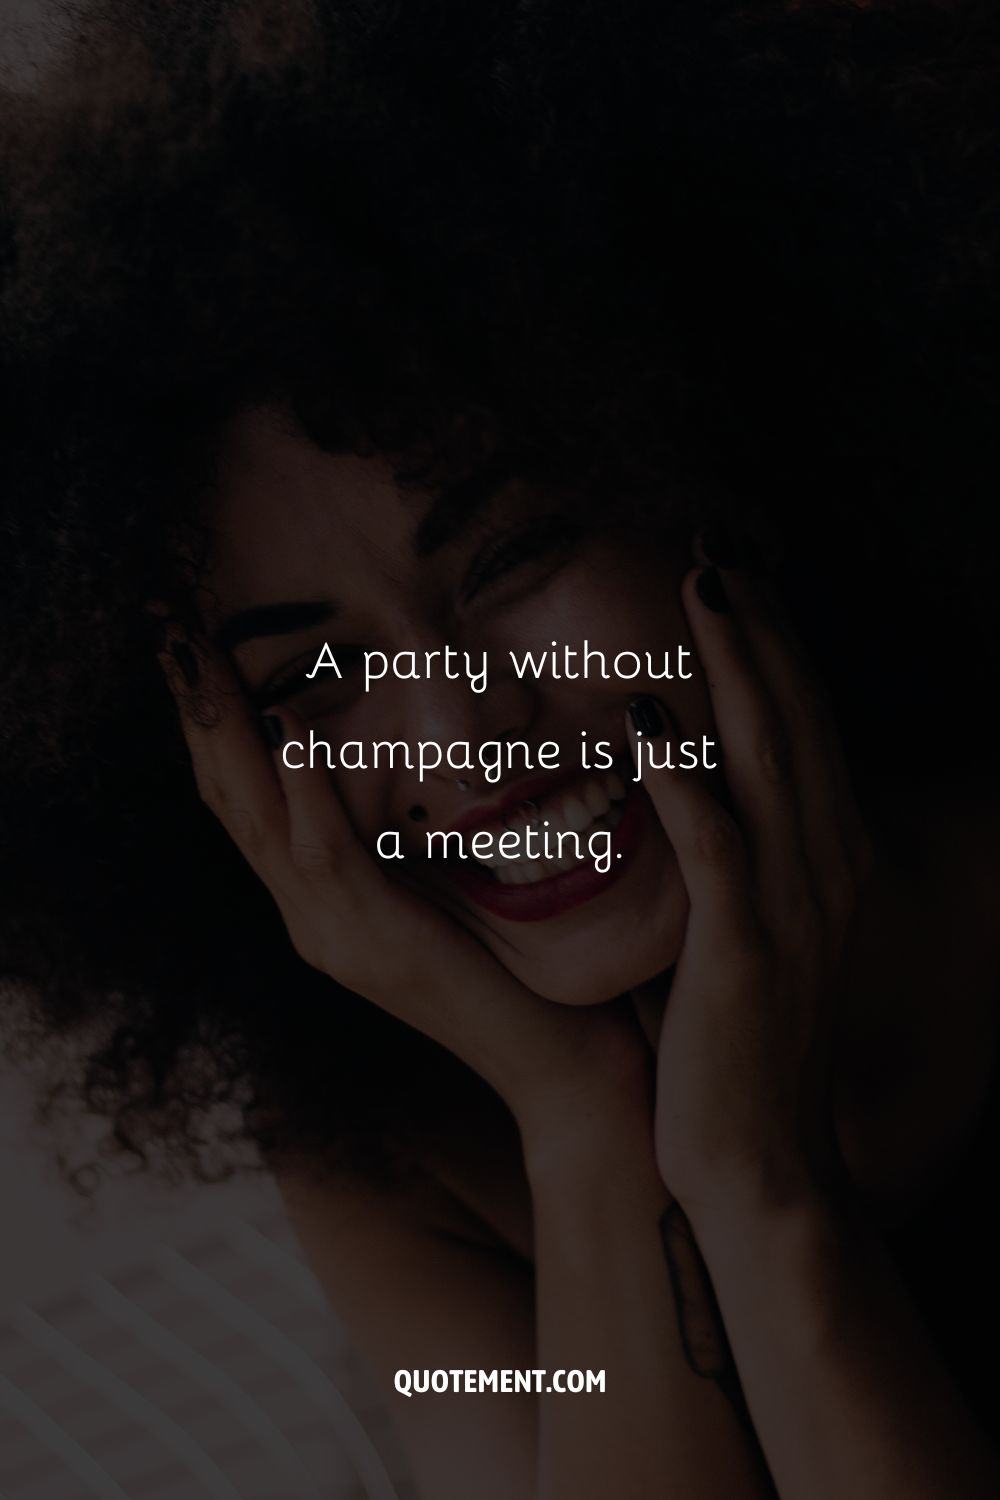 A party without champagne is just a meeting.